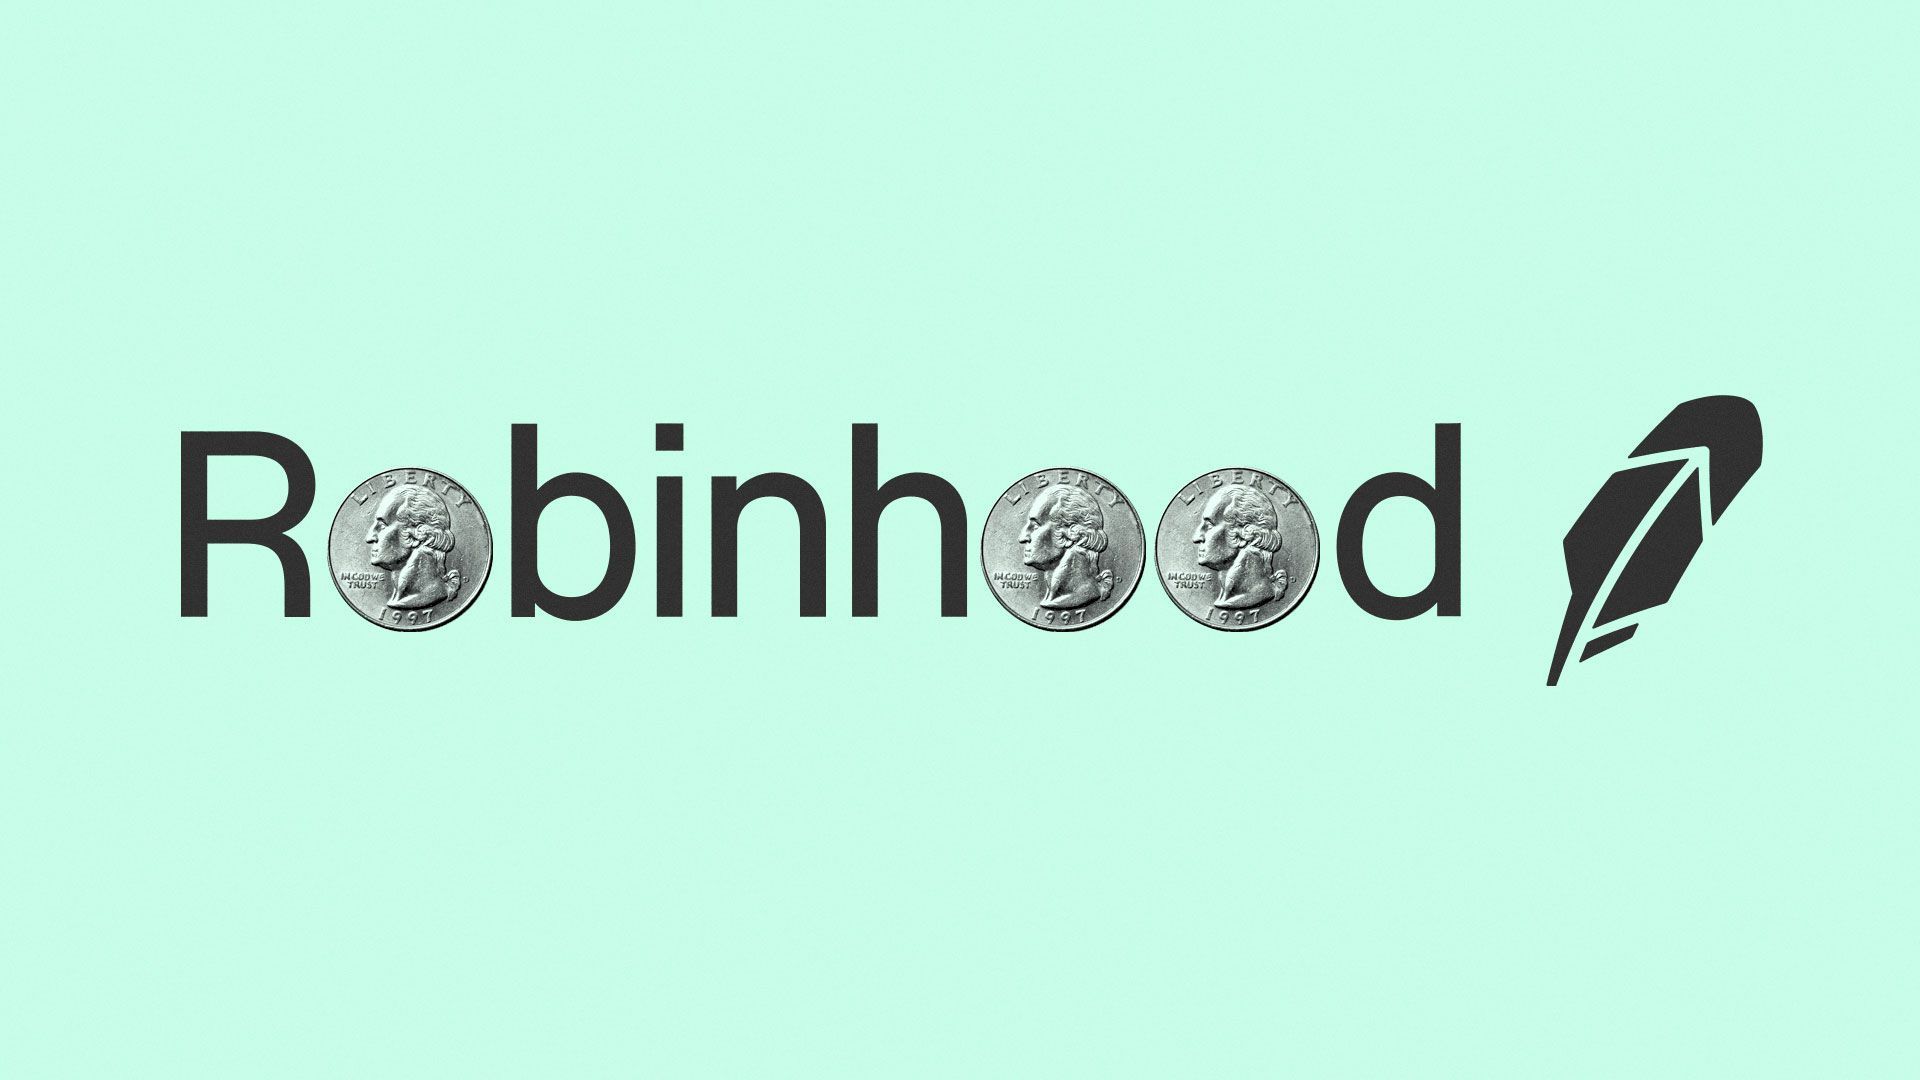 Illustration of the Robinhood logo with quarters replacing the O’s